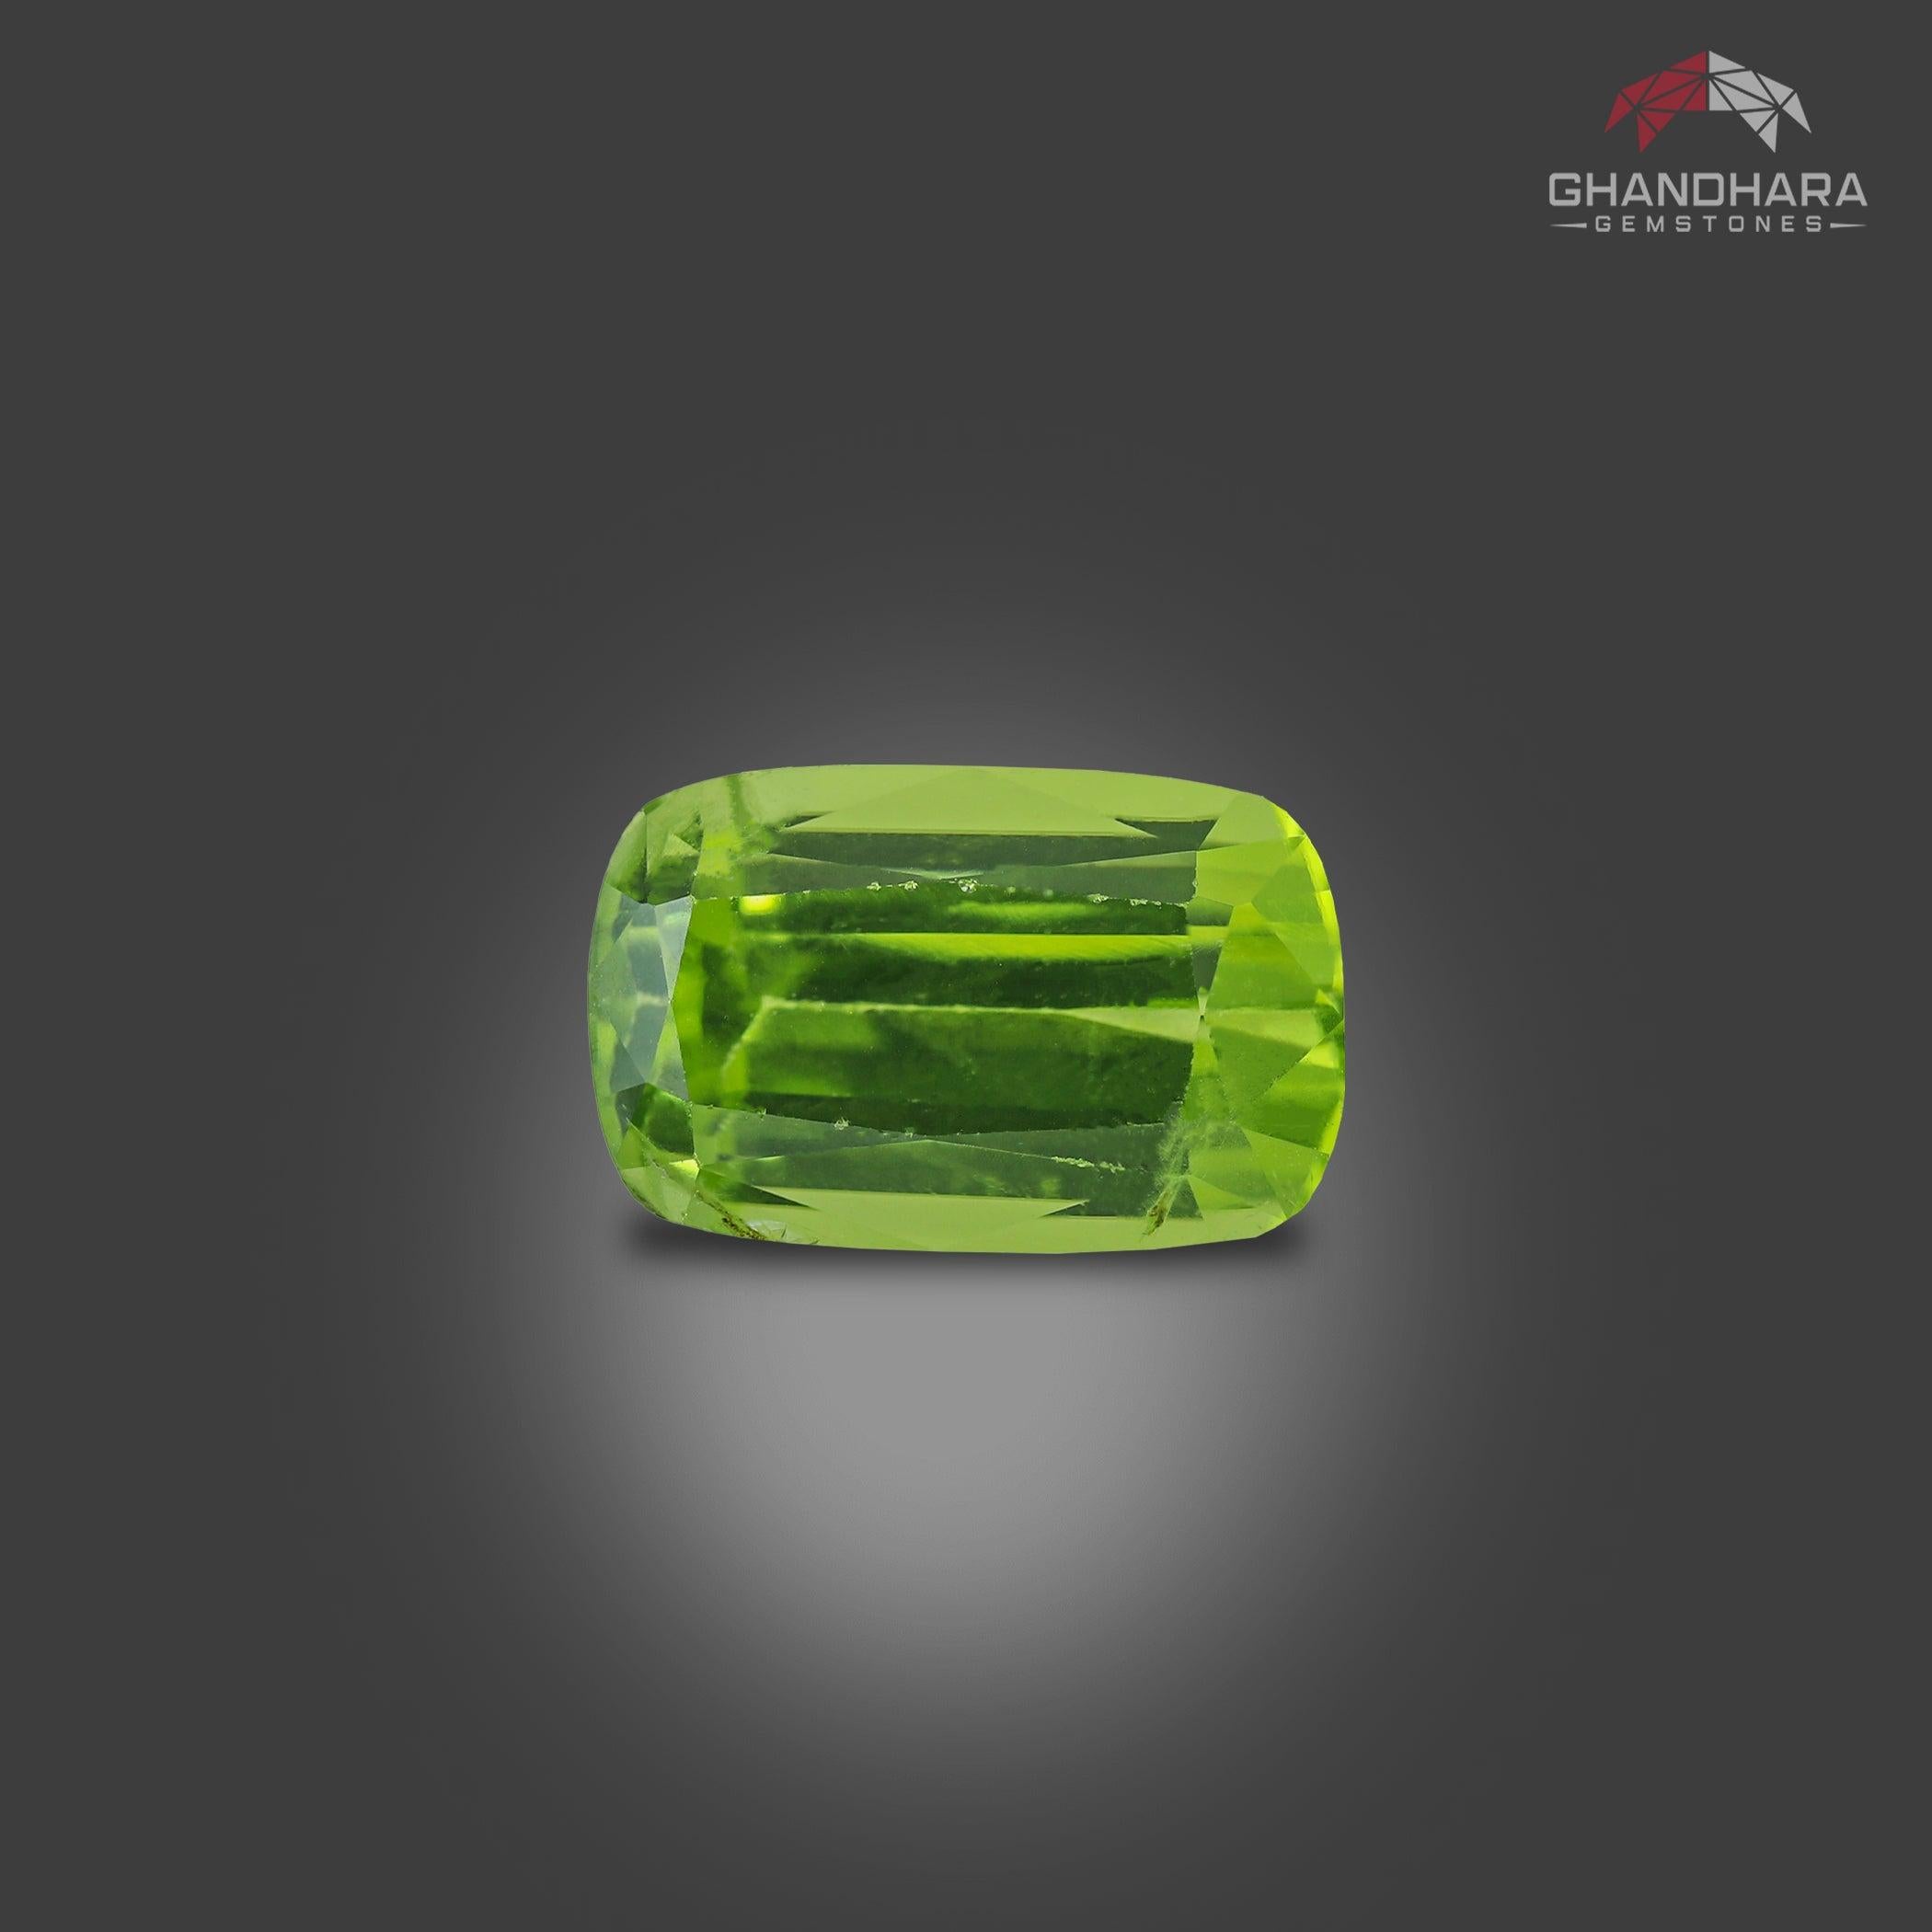 Deep Green Natural Peridot Stone of 4.05 carats from Pakistan has a wonderful cut in a Cushion shape, incredible Green color. Great brilliance. This gem is VVS Clarity.

Product Information:
GEMSTONE TYPE:	Deep Green Natural Peridot